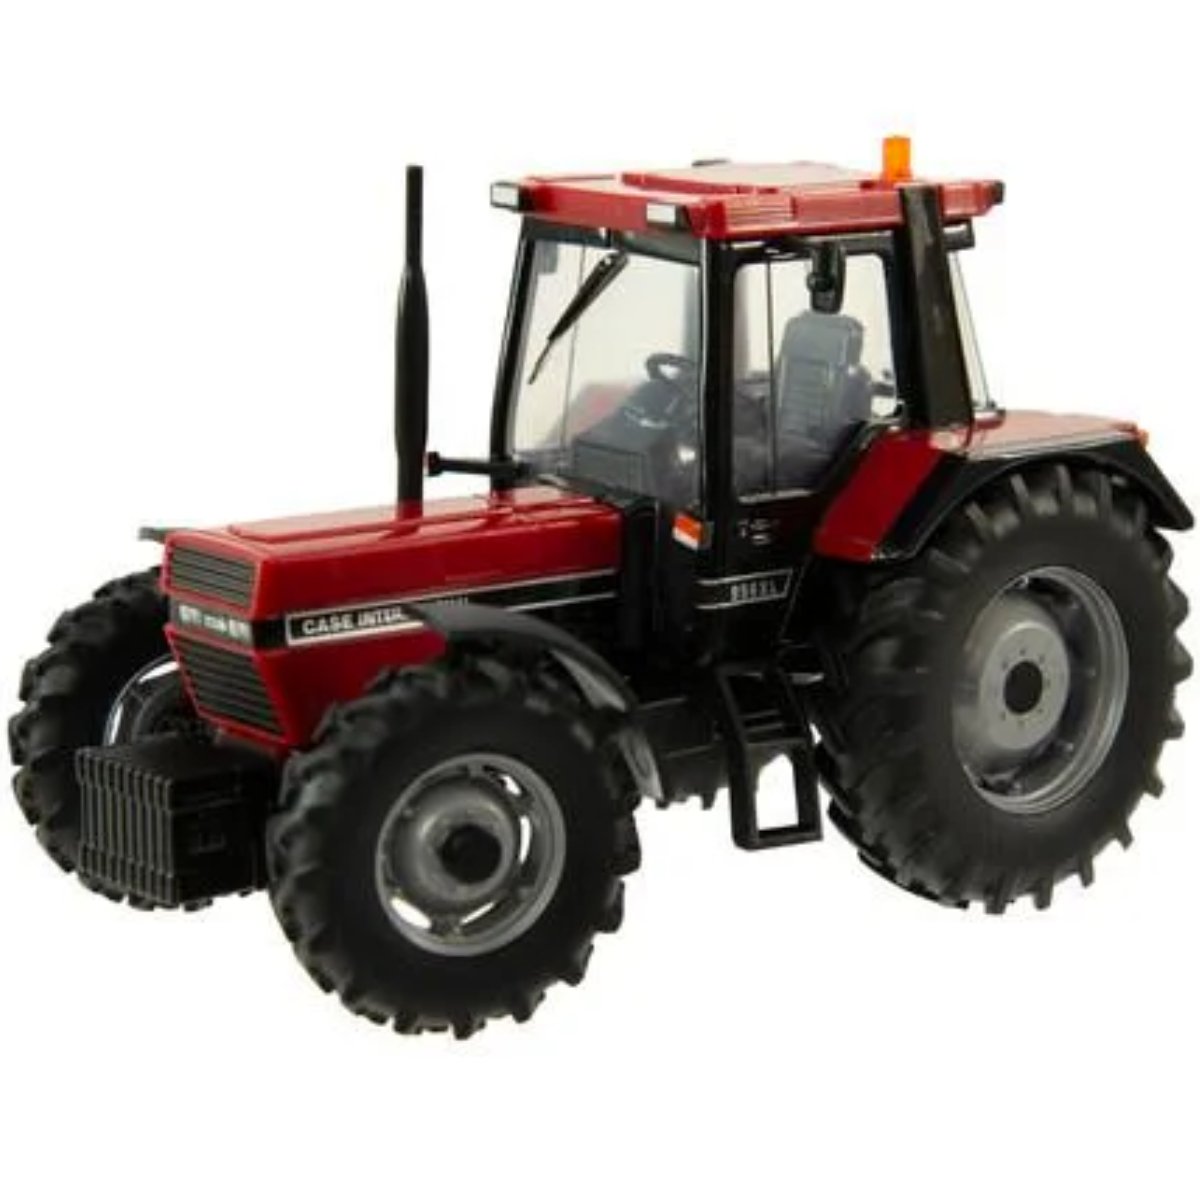 Britains Case IH 956XL 4WD Tractor - 1:32 Scale - Phillips Hobbies